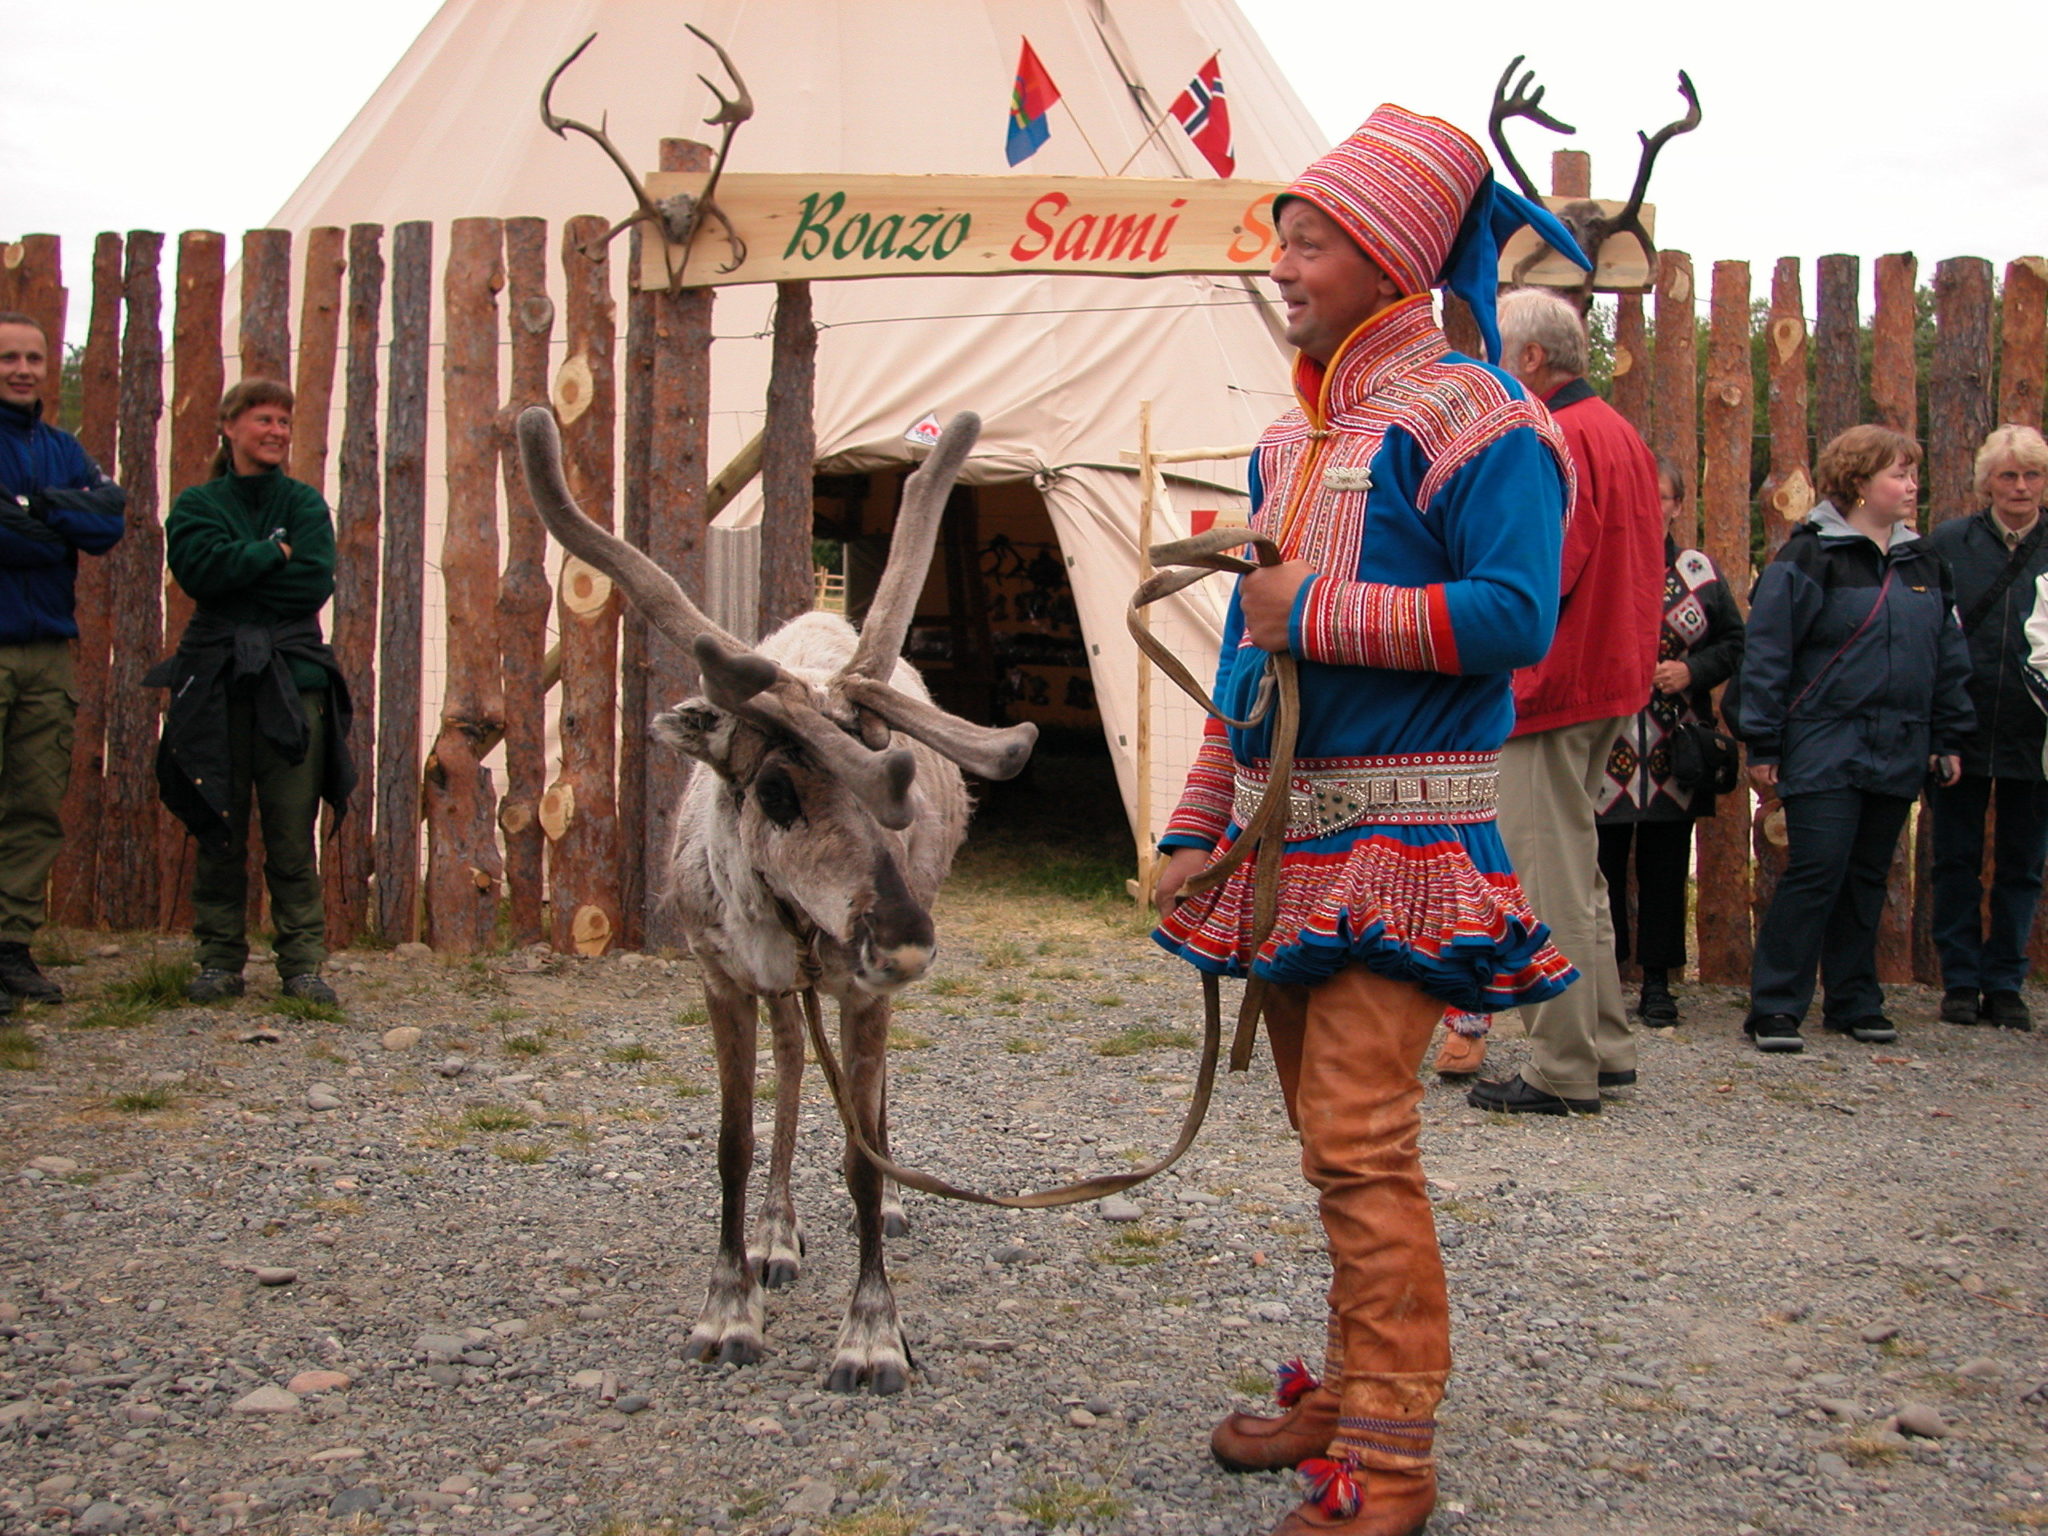 With or without snow, the Sami people and their culture shine through © Nord Norge